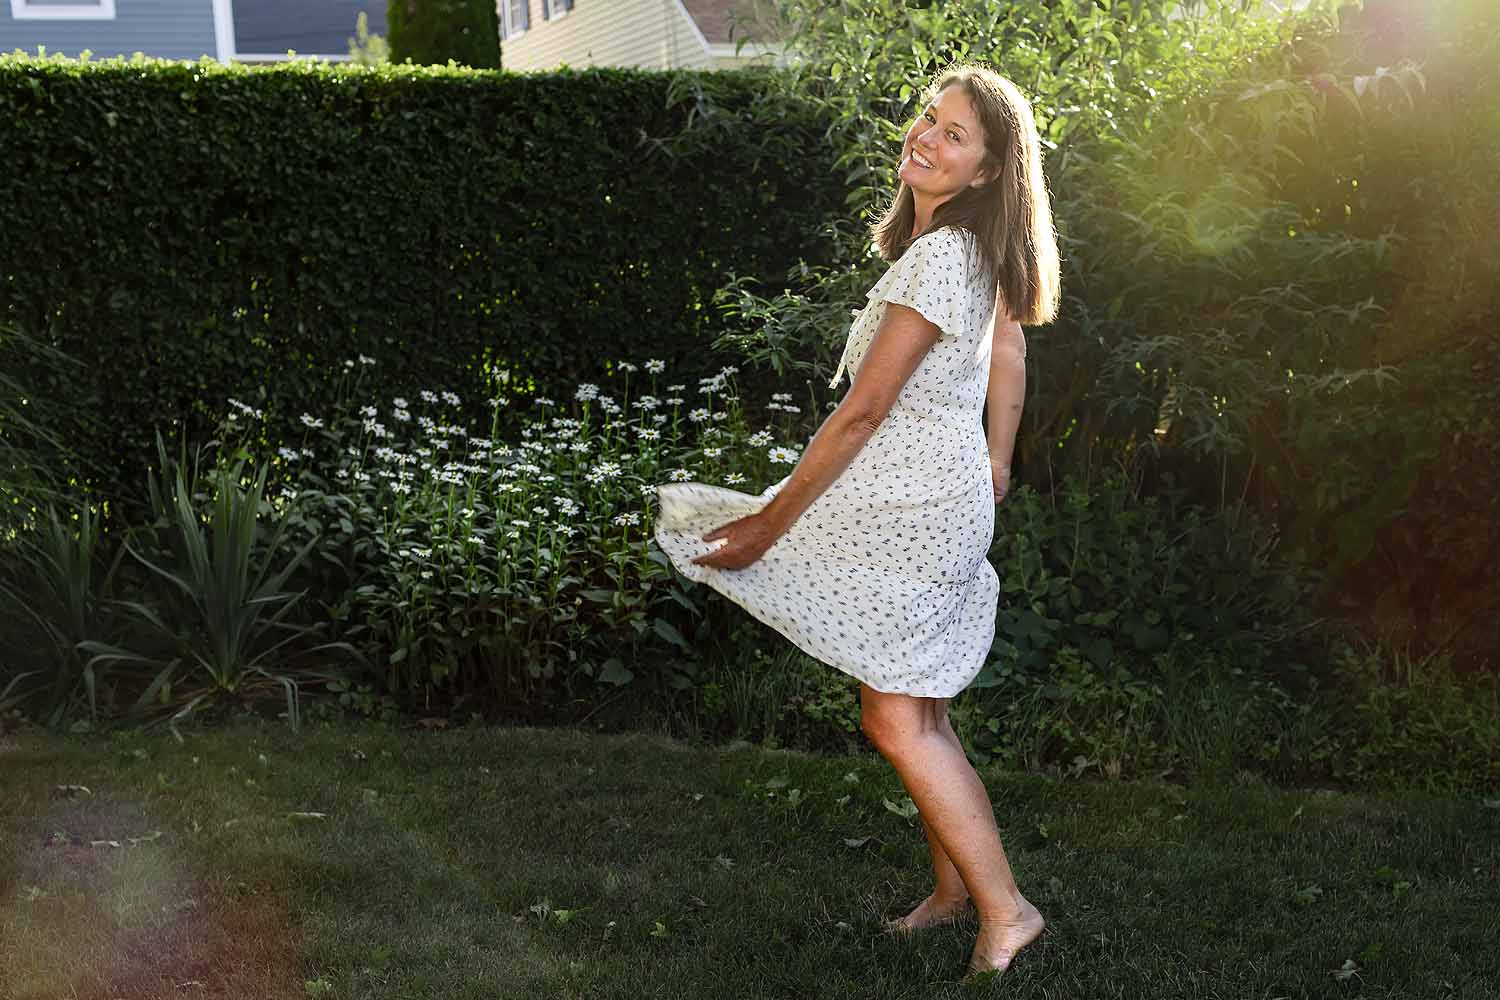 girl spinning around in a dress, July 2020 personal project for Old Saybrook CT photographer